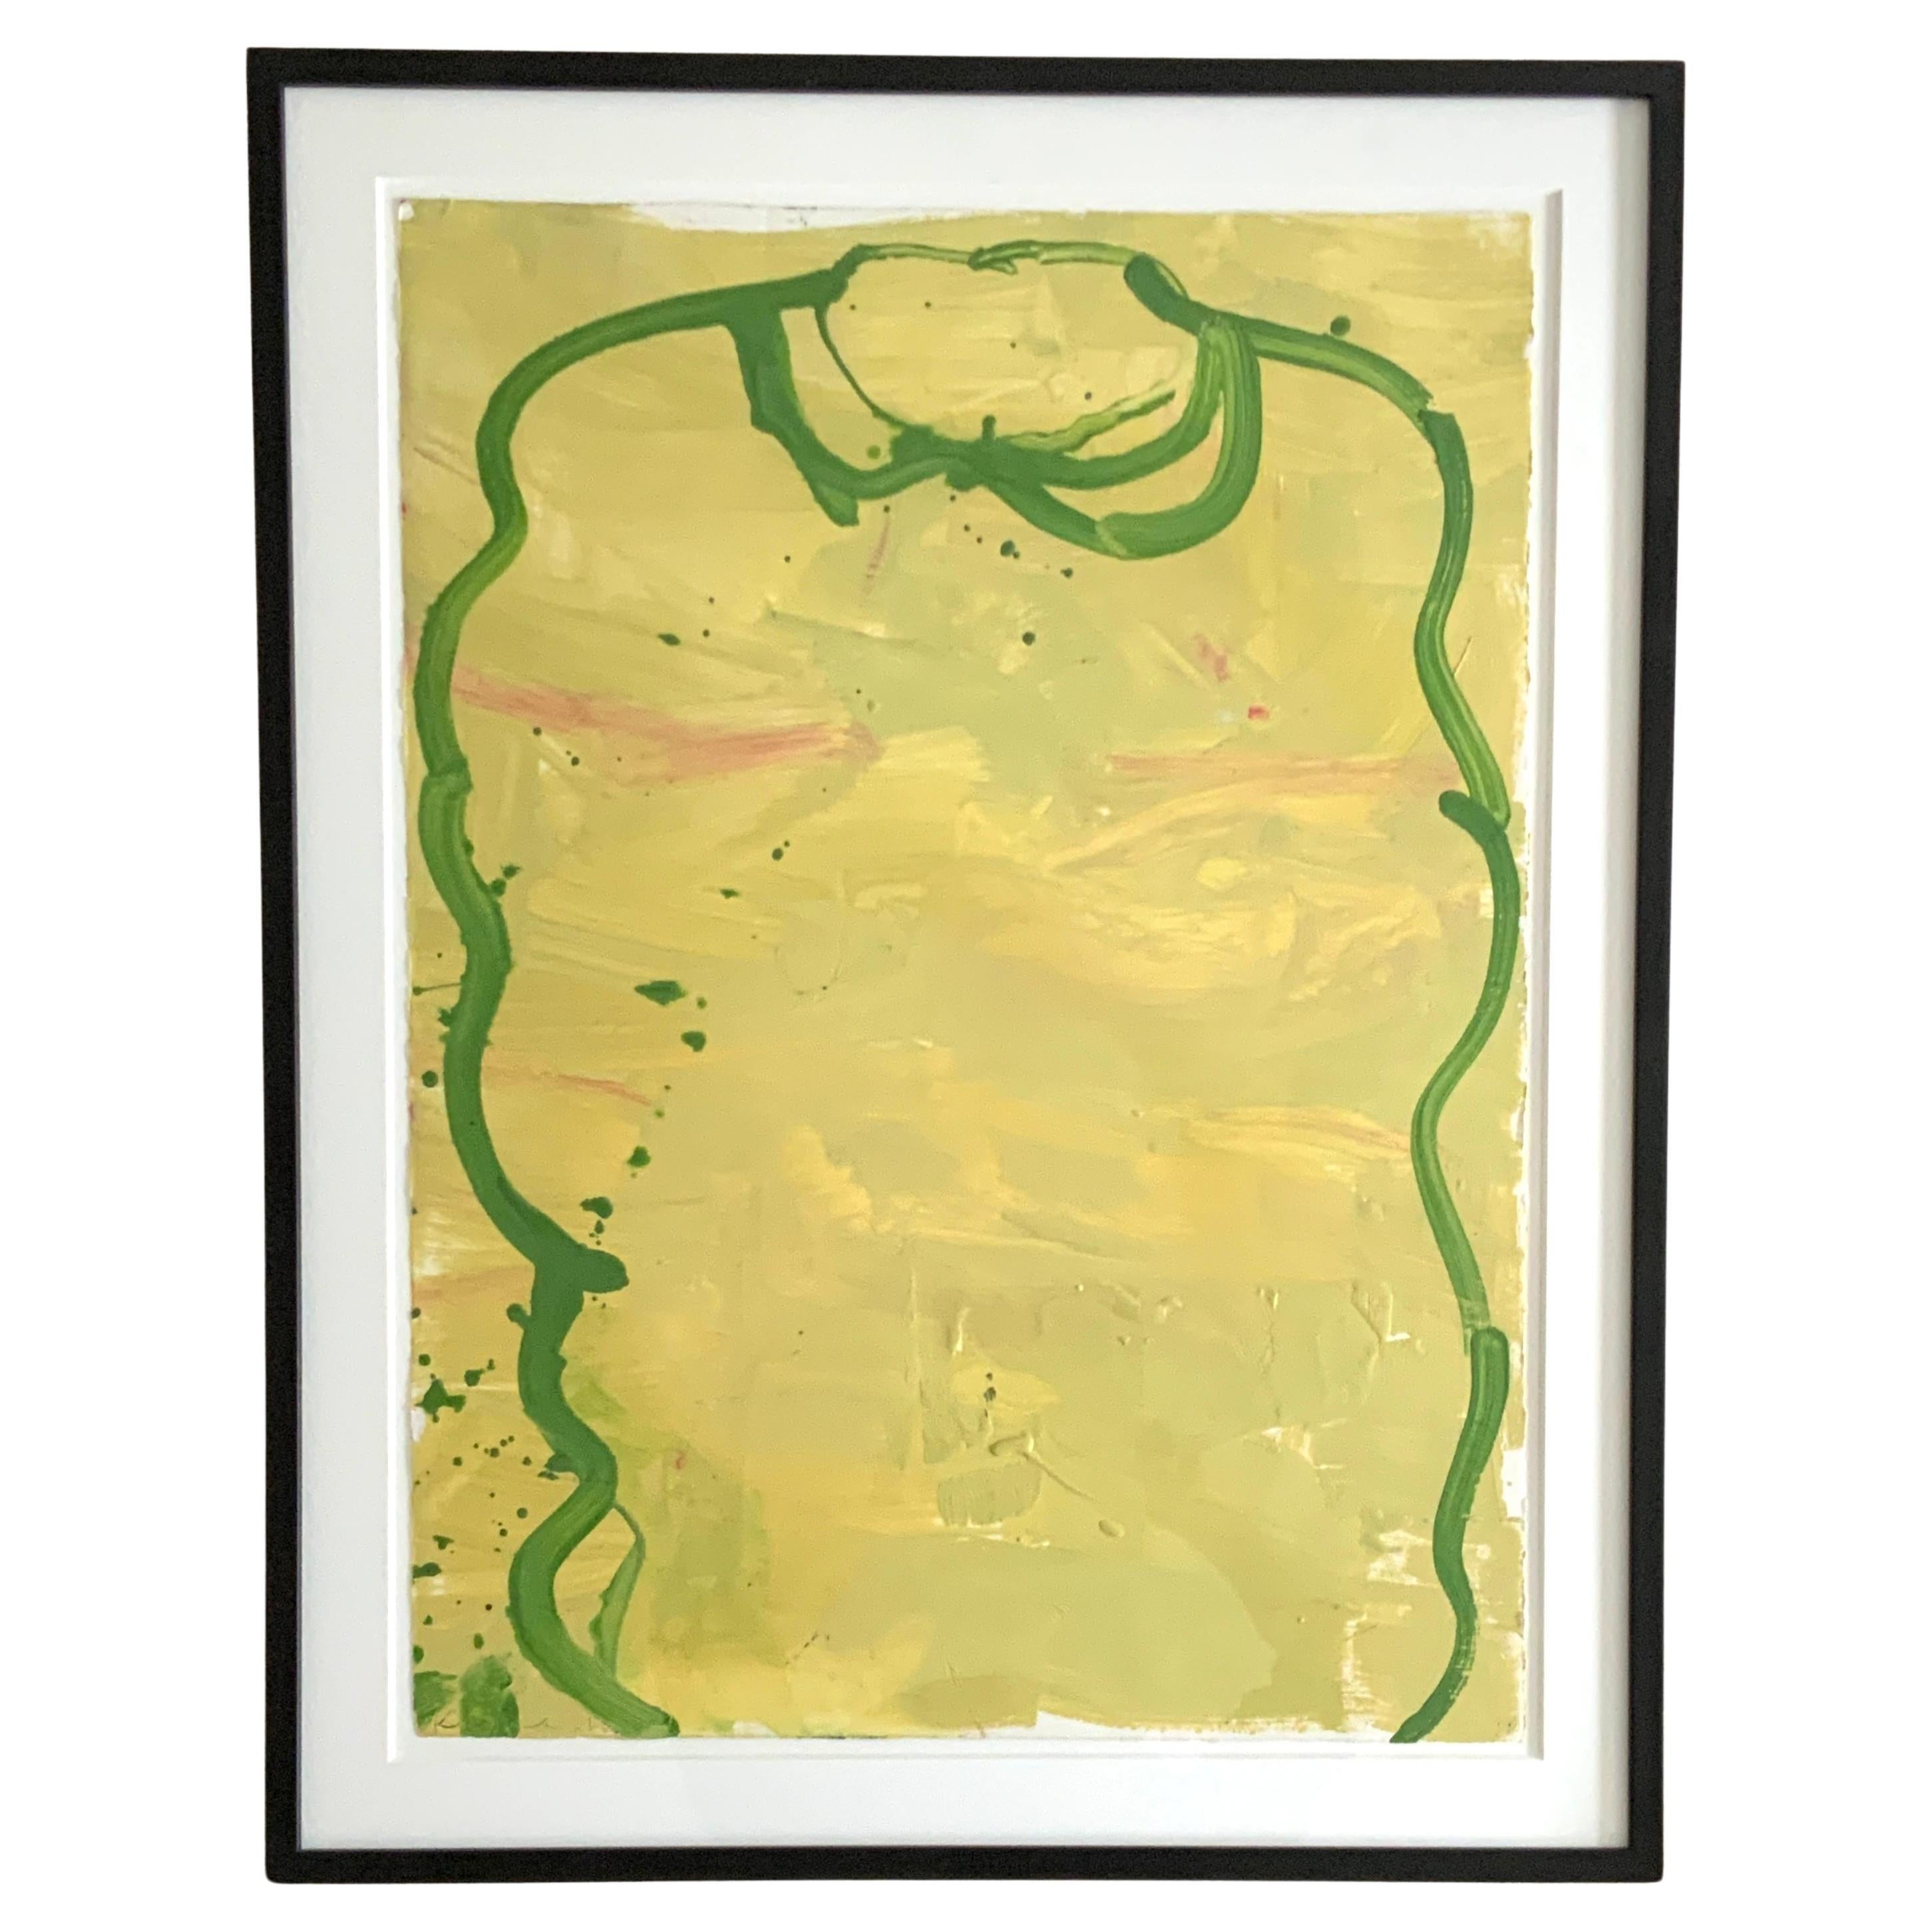 Gary Komarin “Untitled Green Vessel on Yellow Green”, acrylic on paper, 2000 For Sale